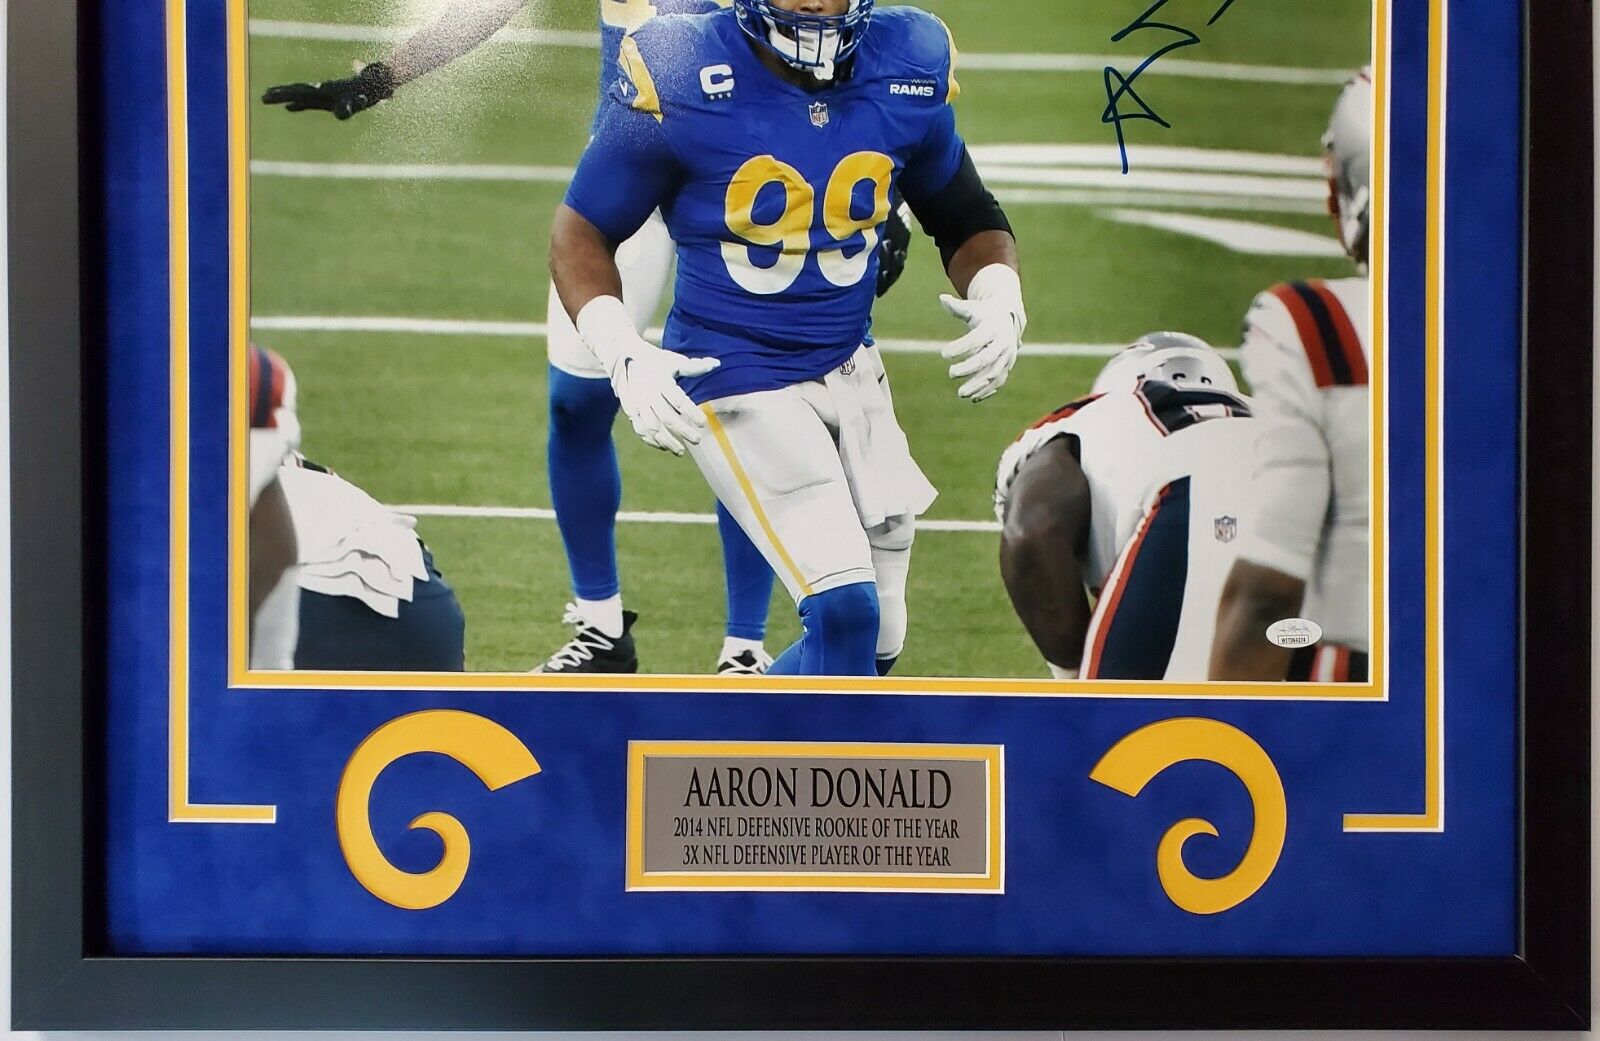 MVP Authentics L.A. Rams Aaron Donald Framed In Suede Signed 16X20 Photo Jsa Coa 314.10 sports jersey framing , jersey framing